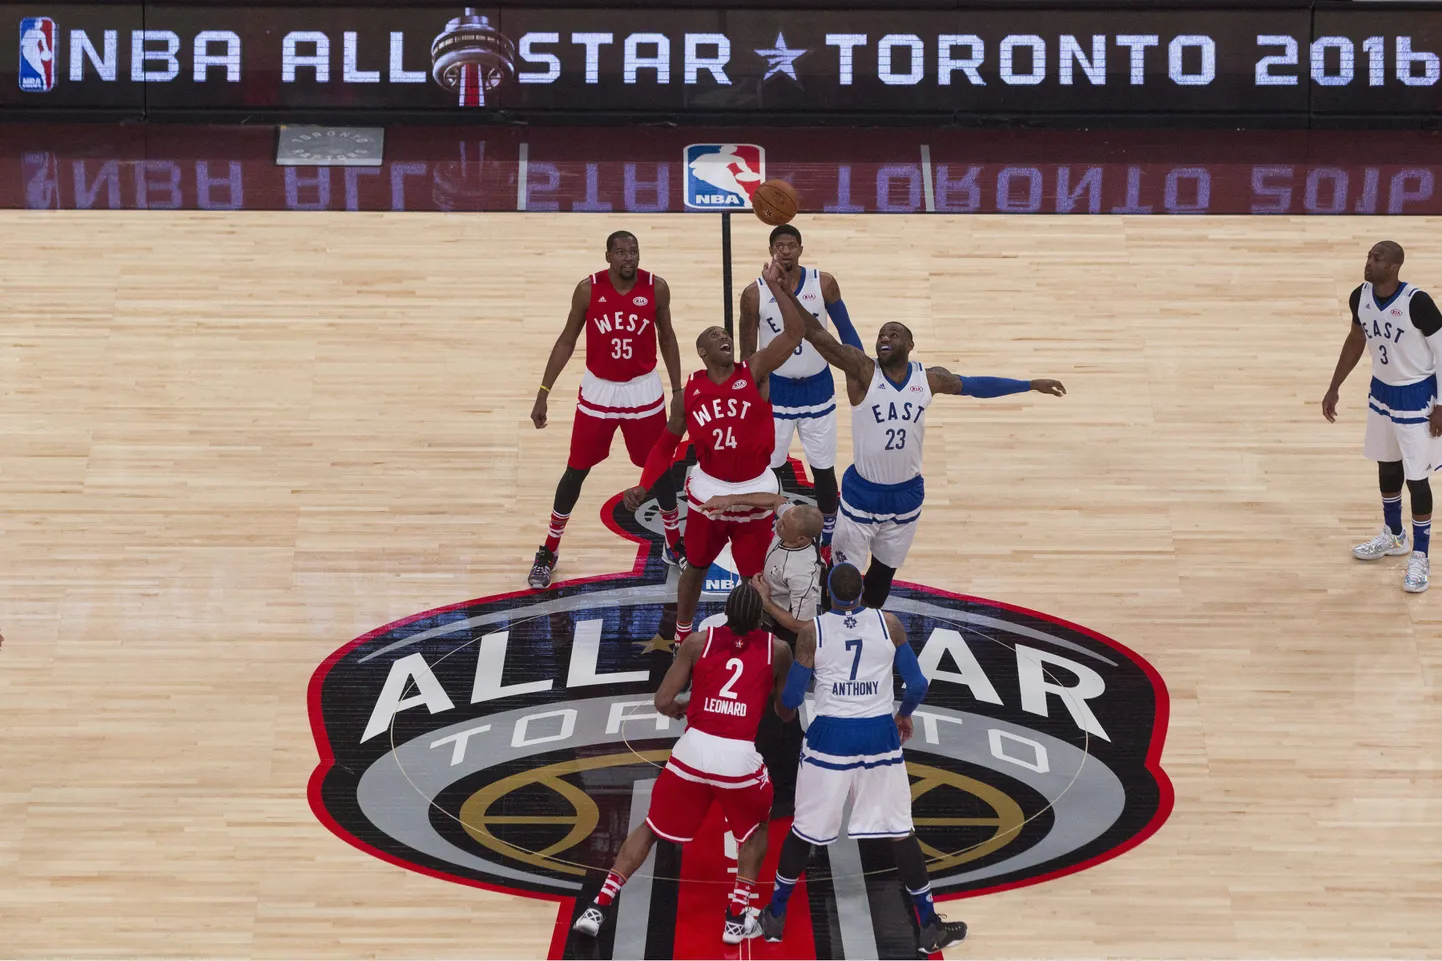 Western Conference's Kobe Bryant, of the Los Angeles Lakers, (24) and Eastern Conference's LeBron James, of the Cleveland Cavaliers (23) compete for the tip off to start NBA All-Star Game basketball action in Toronto on Sunday, February 14, 2016. THE CANADIAN PRESS/Chris Young